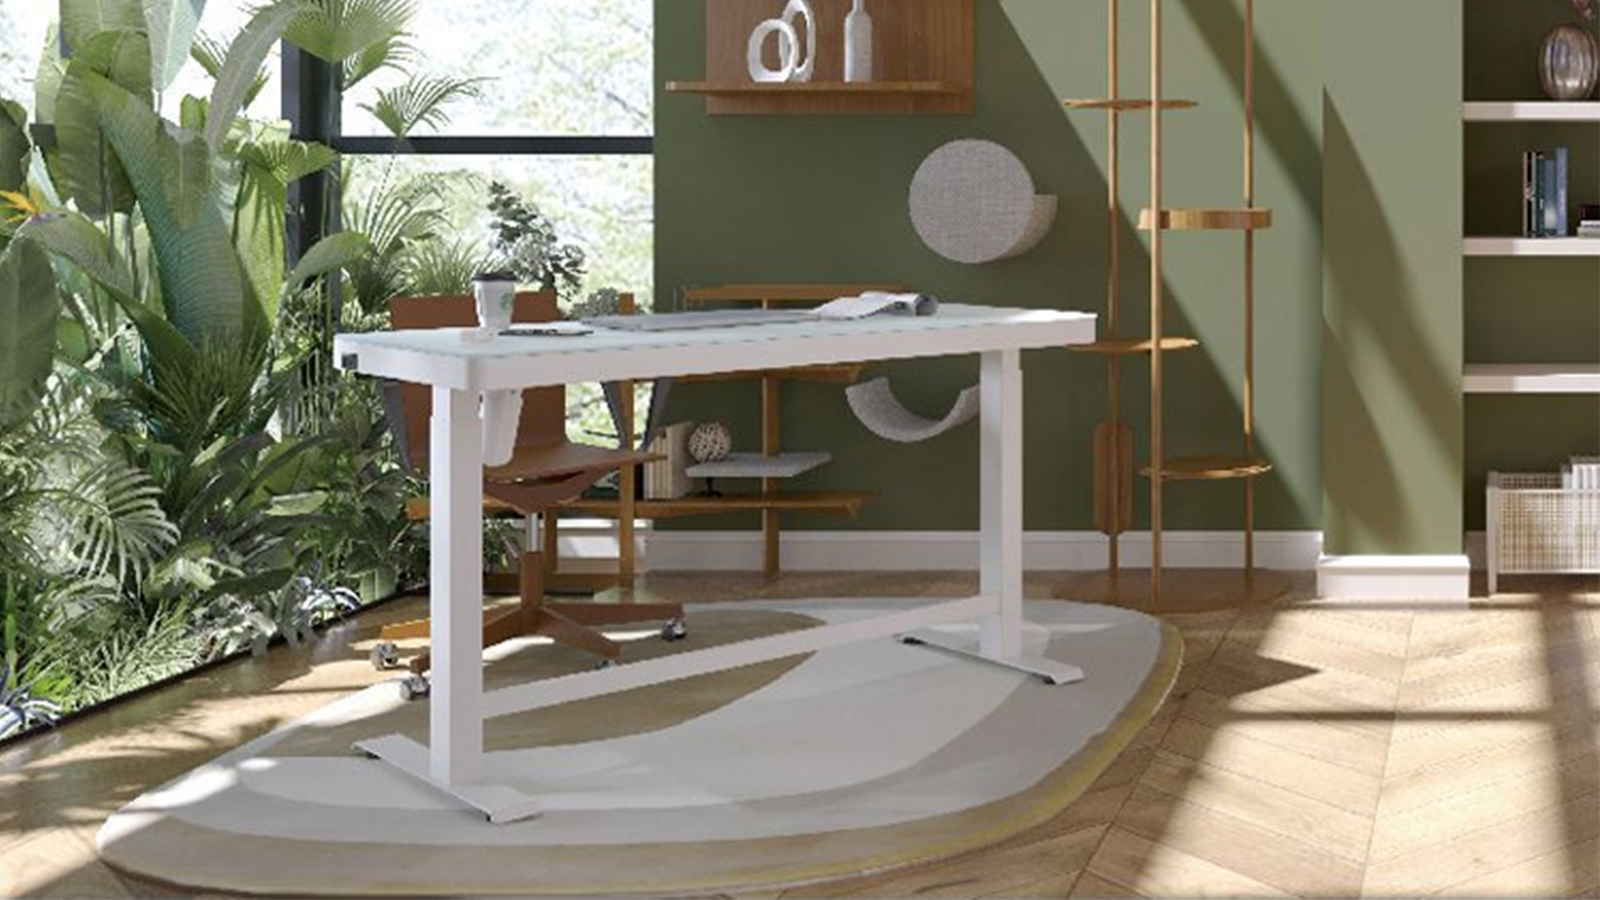 Lifting table, a smart furniture that can significantly improve your work and life quality.